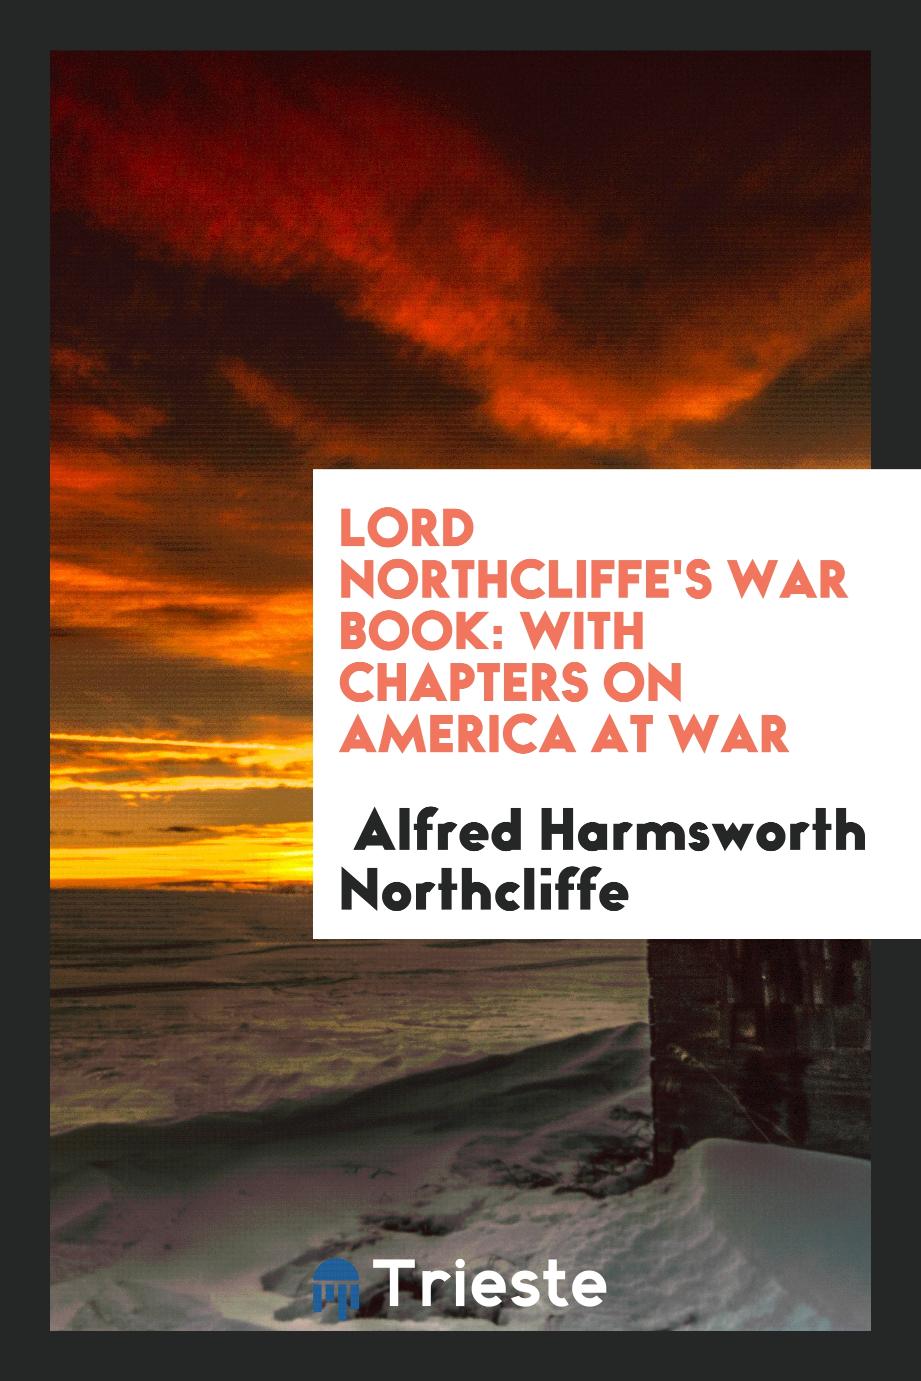 Lord Northcliffe's War Book: With Chapters on America at War